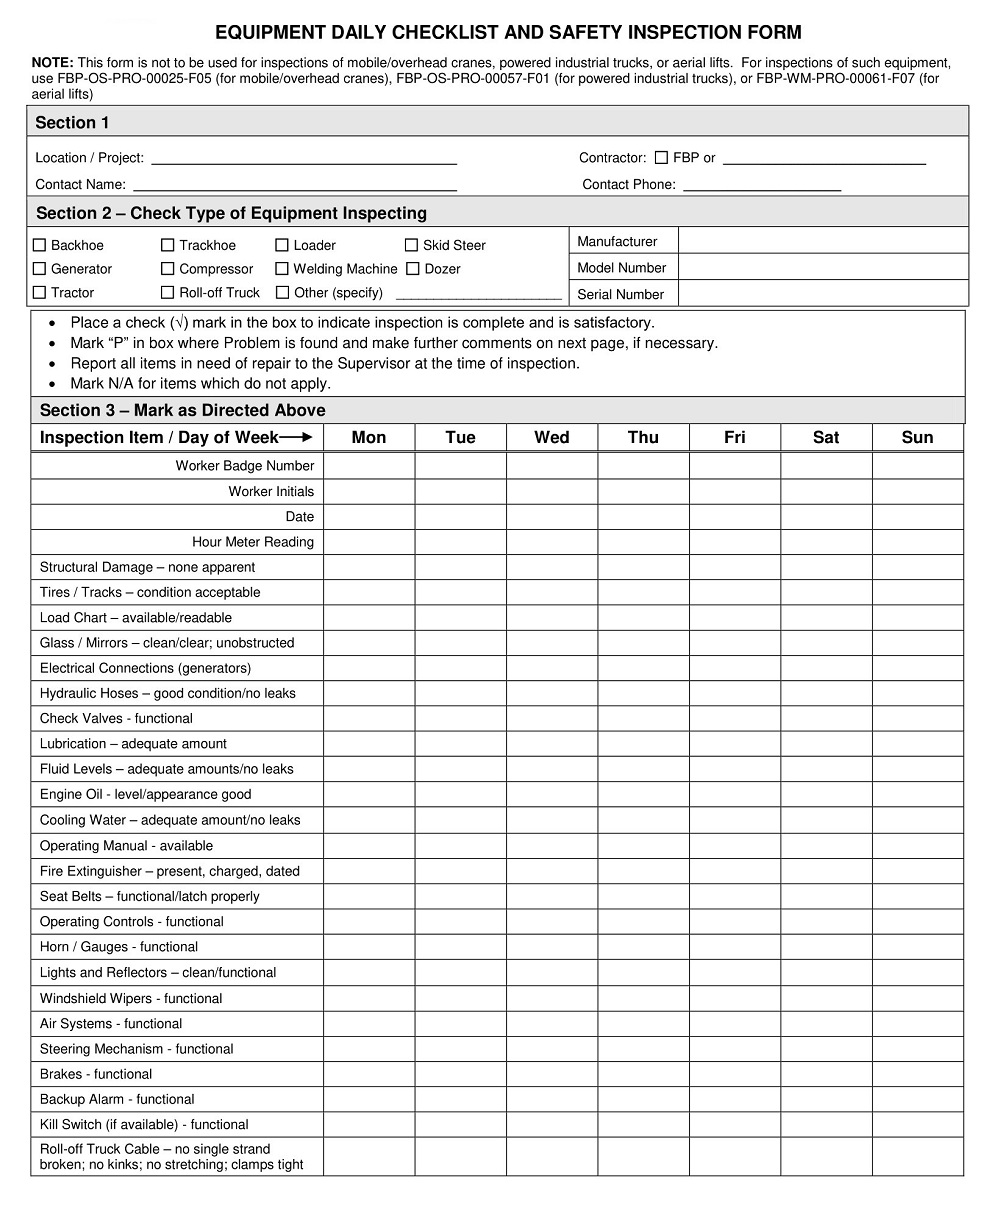 Equipment Daily Checklist And Safety Inspection Form